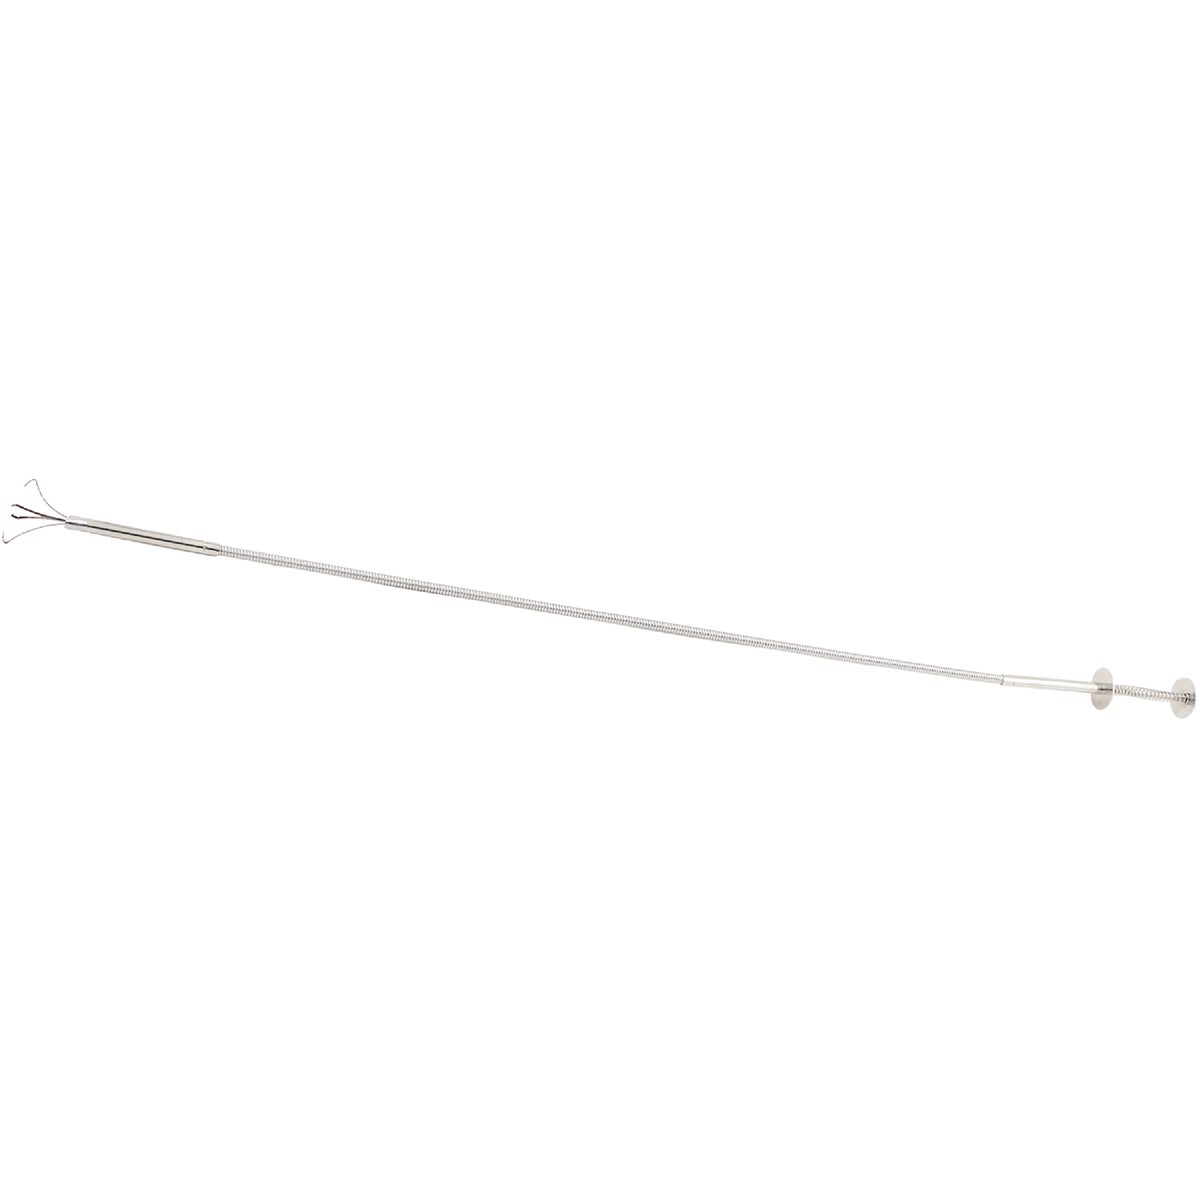 Item 364614, The Great Neck 24 Inch Pick-up Tool has a flexible shaft for hard-to-reach 